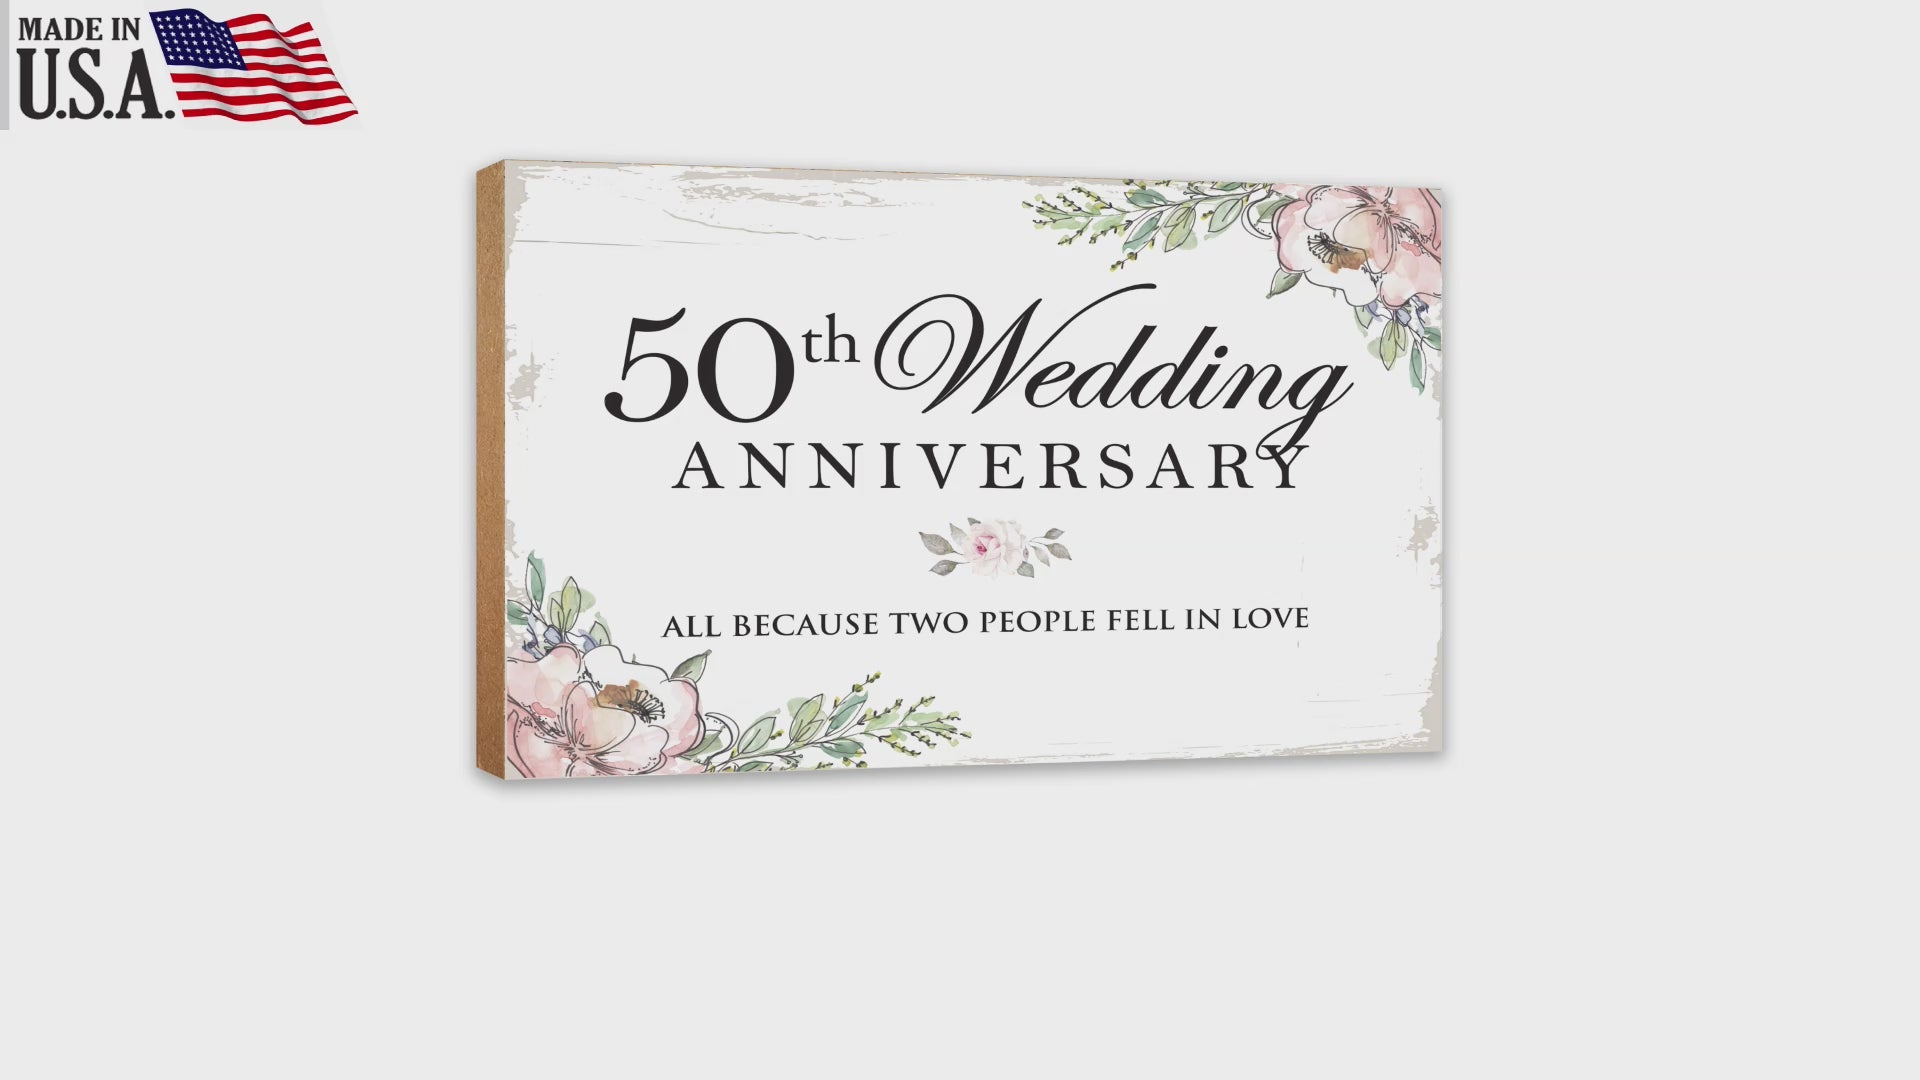 50th Wedding Anniversary Unique Shelf Decor and Tabletop Signs Gifts for Couples - Fell In Love